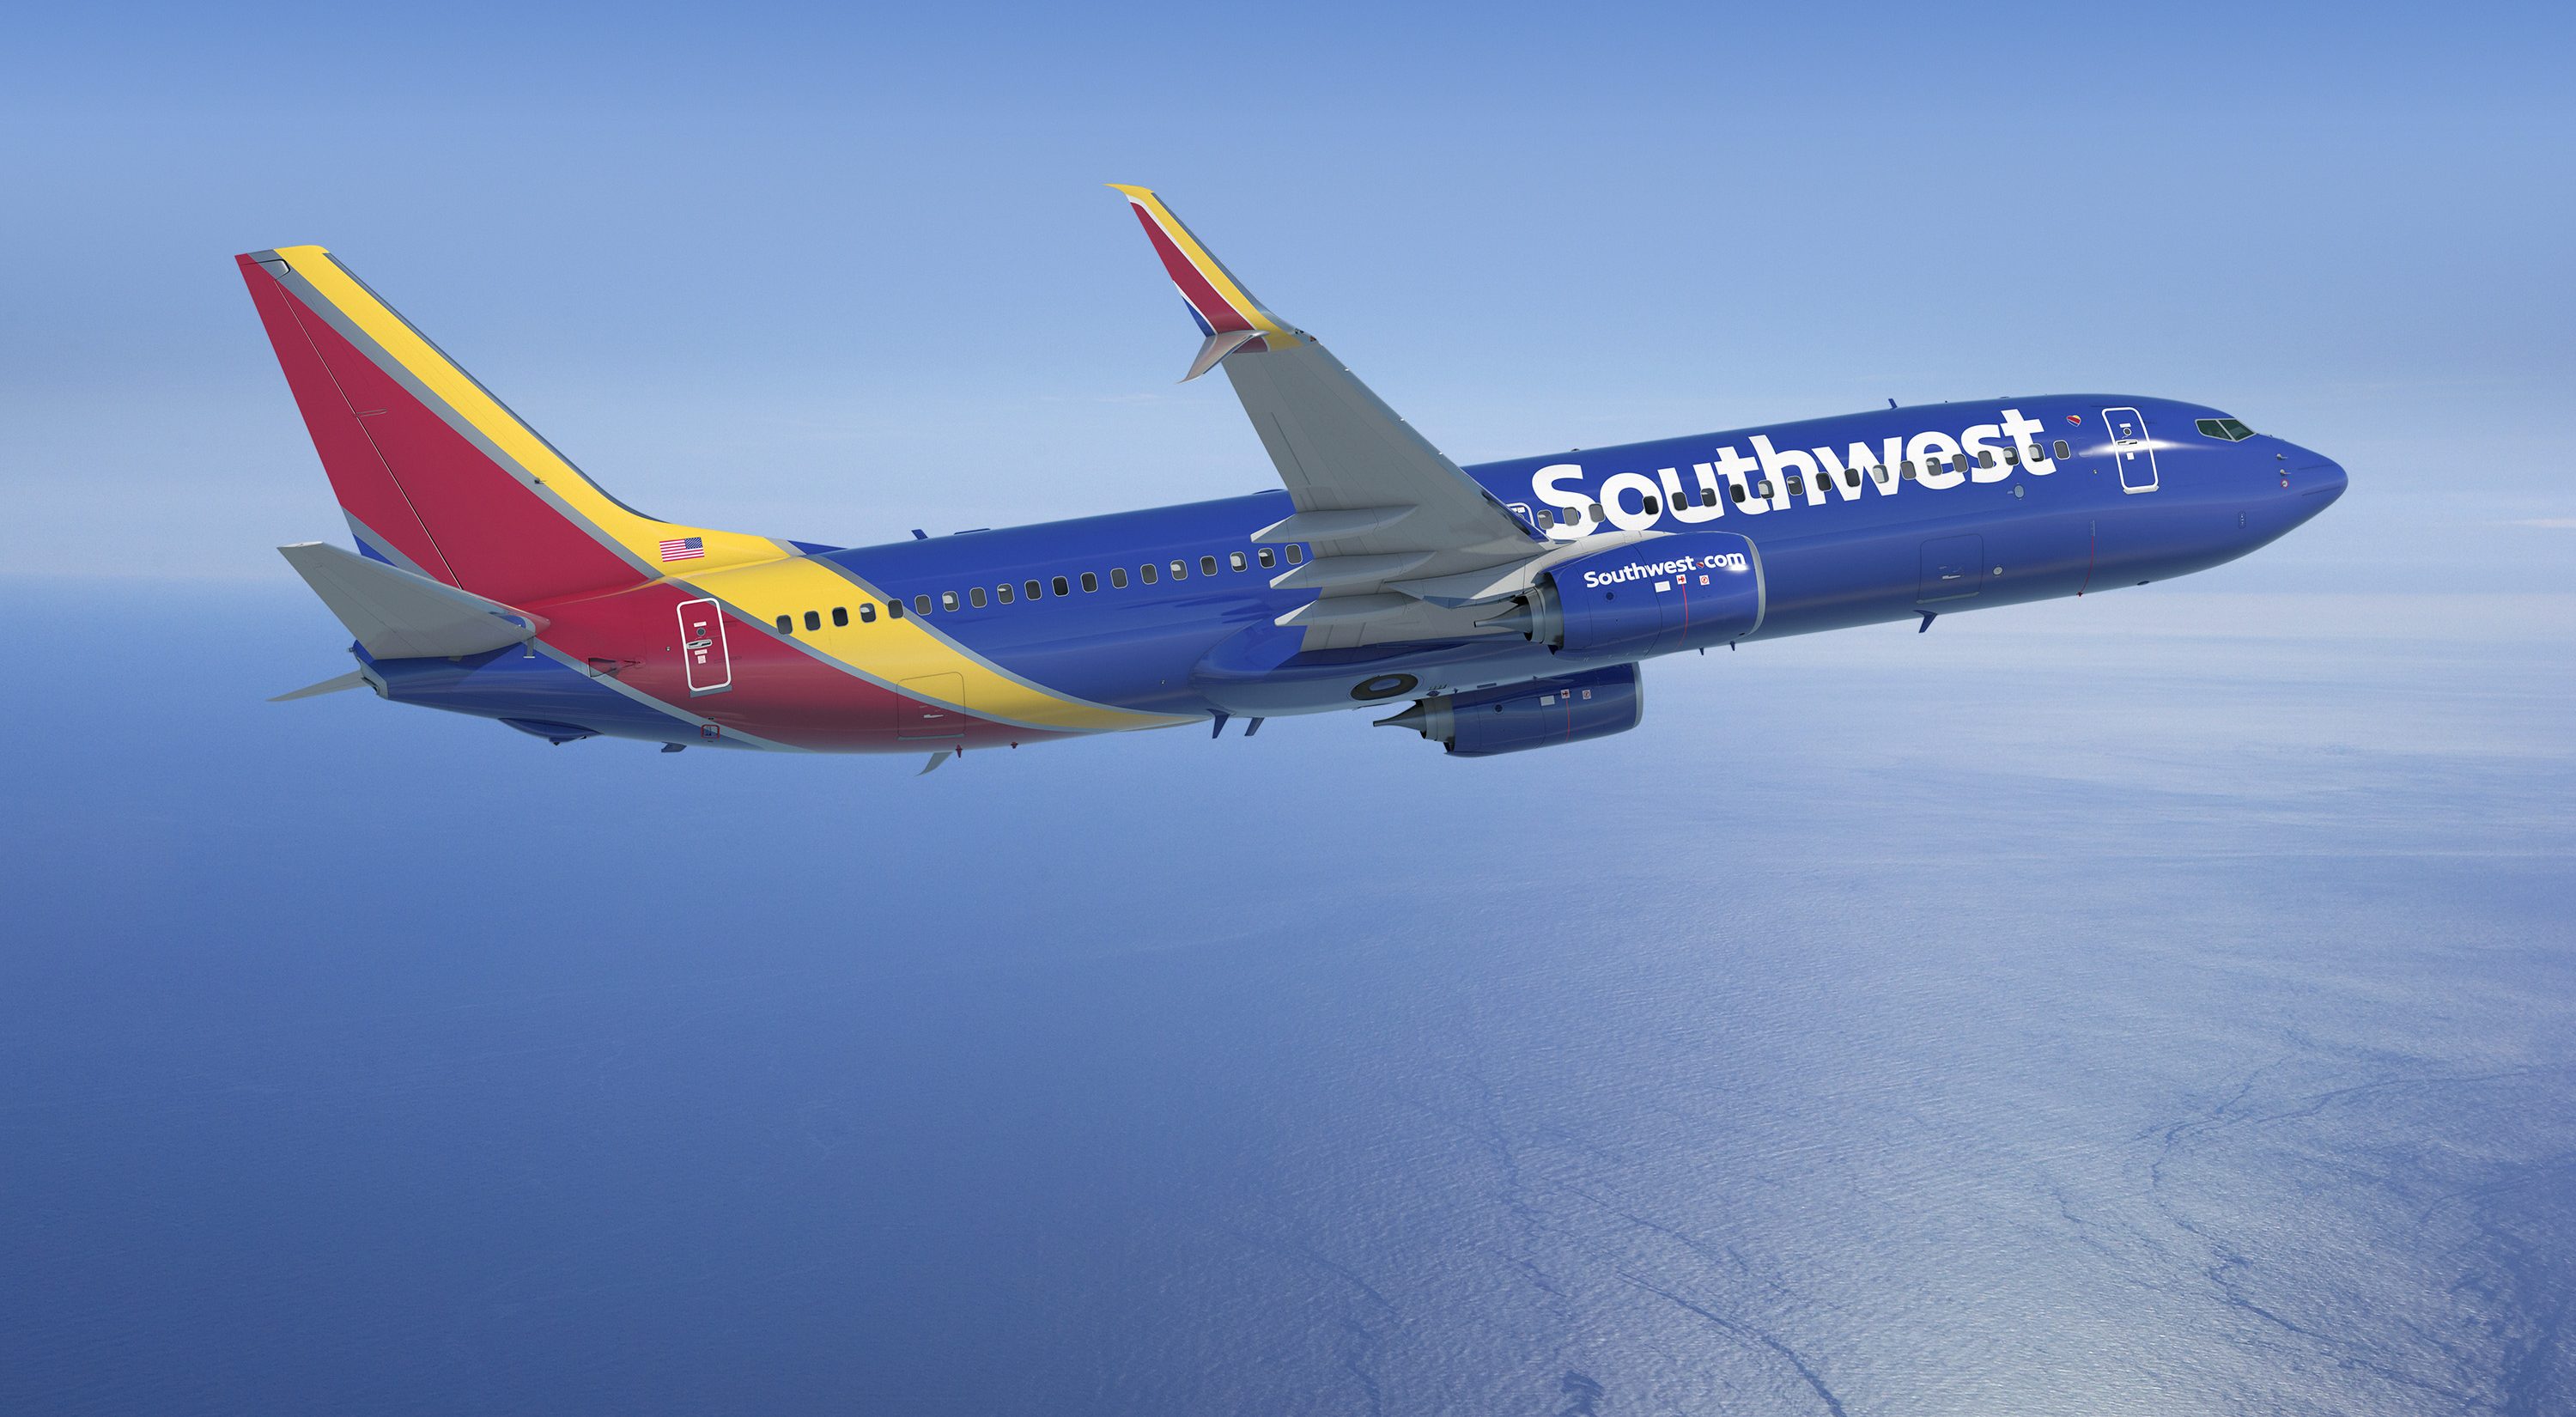                      Southwest Airlines Officially Announces They're Starting Flights To Hawaii                             
                     